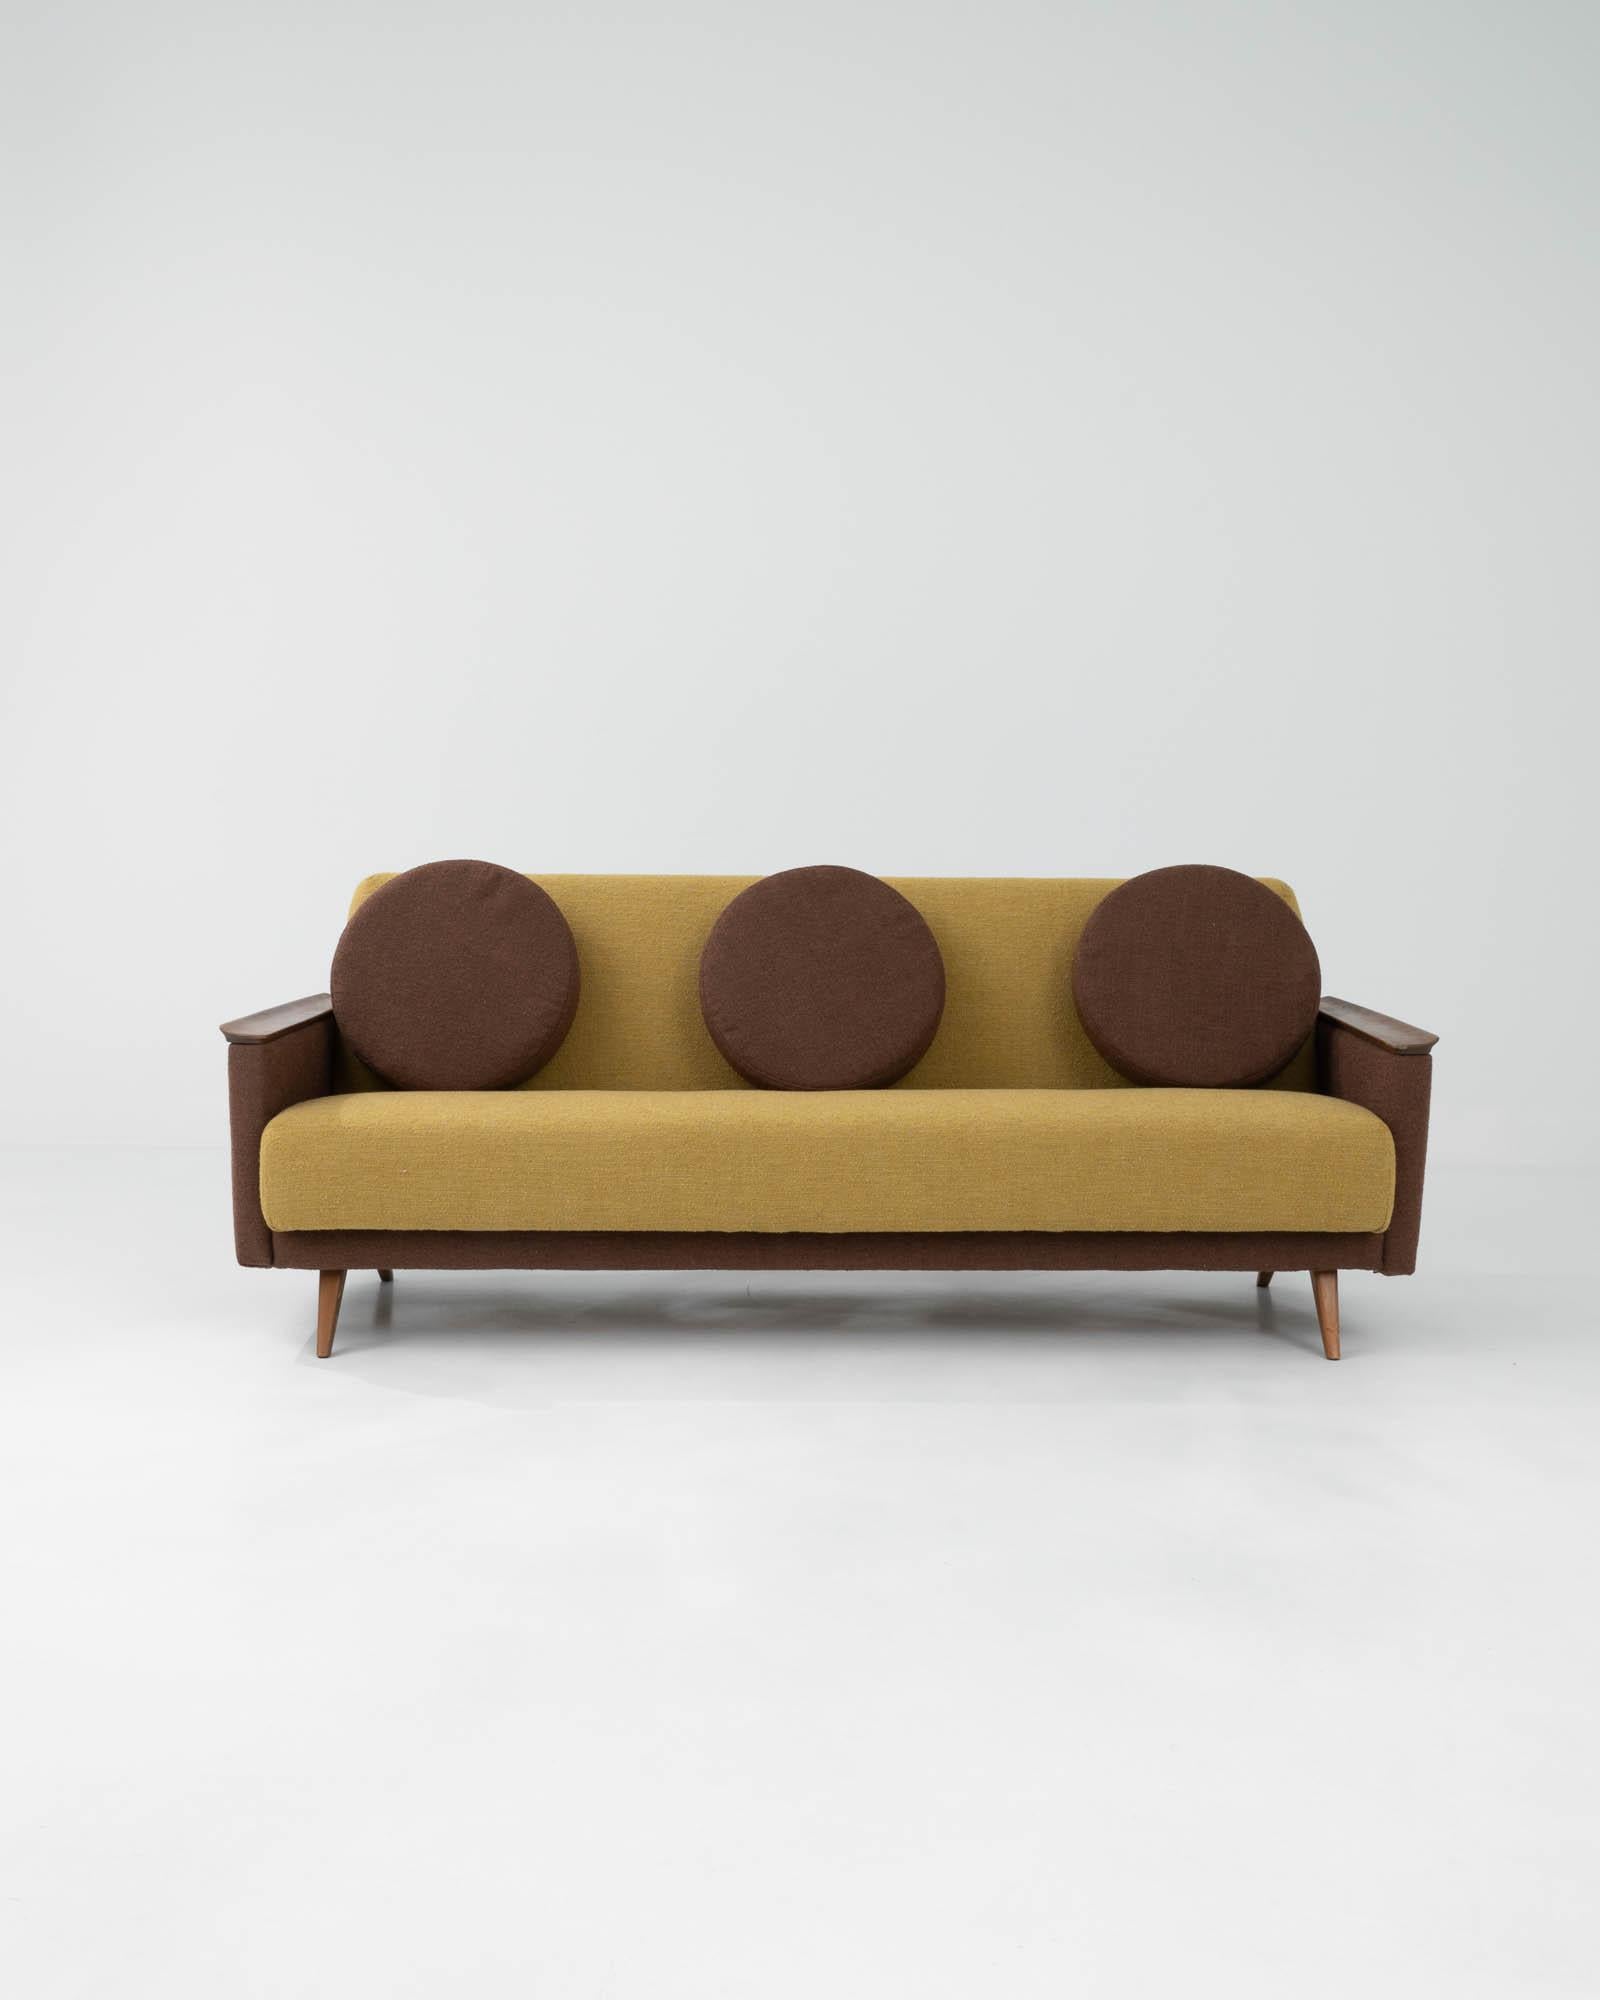 Made during the 20th century, this vintage sofa beautifully blends the whimsical mid-century modern aesthetic with the functional minimalism of Scandinavian furniture. Its design combines angular and circular elements, showcasing splayed tapered